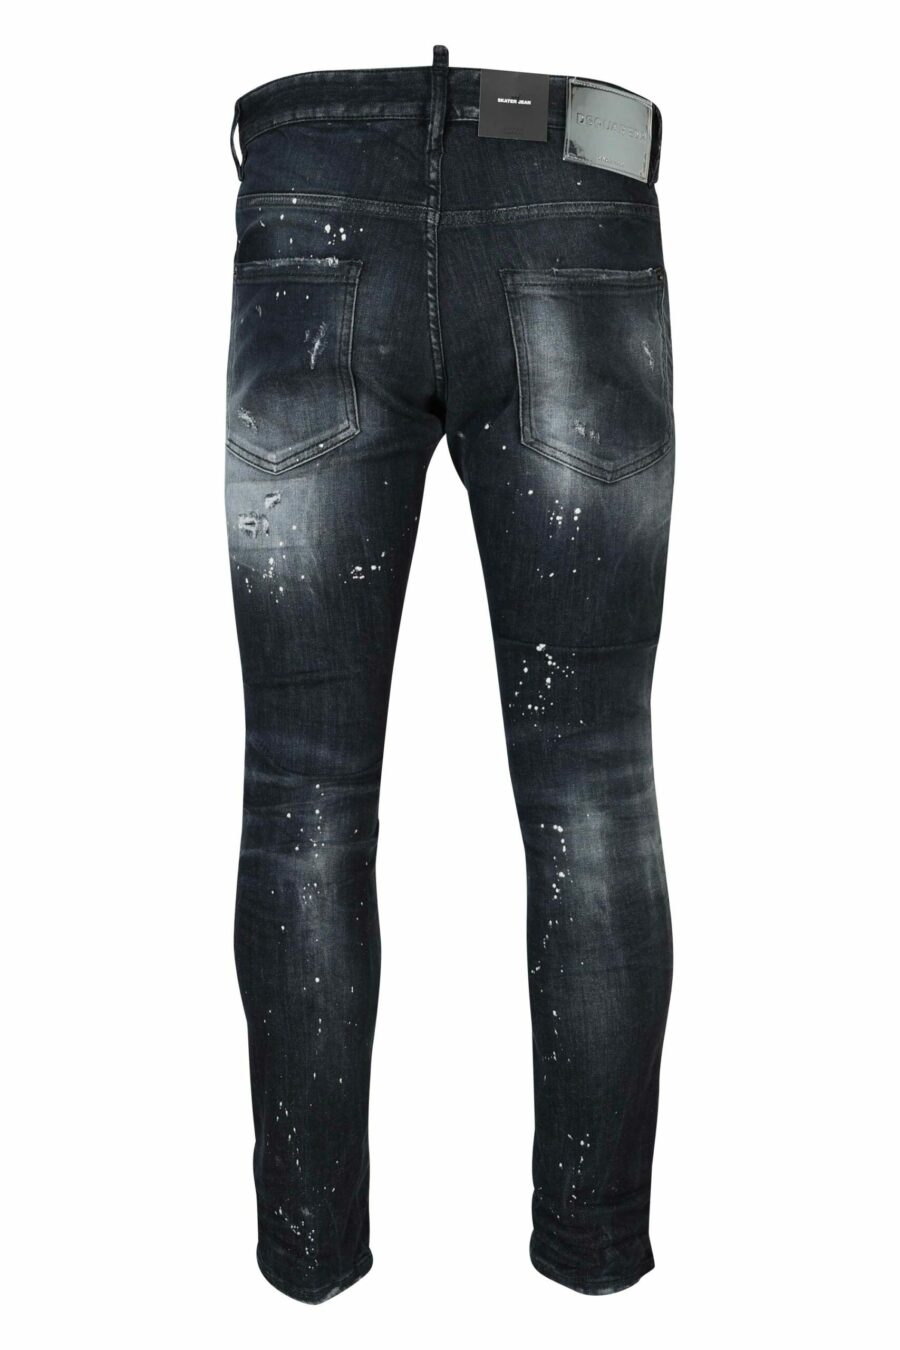 Black "skater jean" jeans with rips - 8054148474126 2 scaled